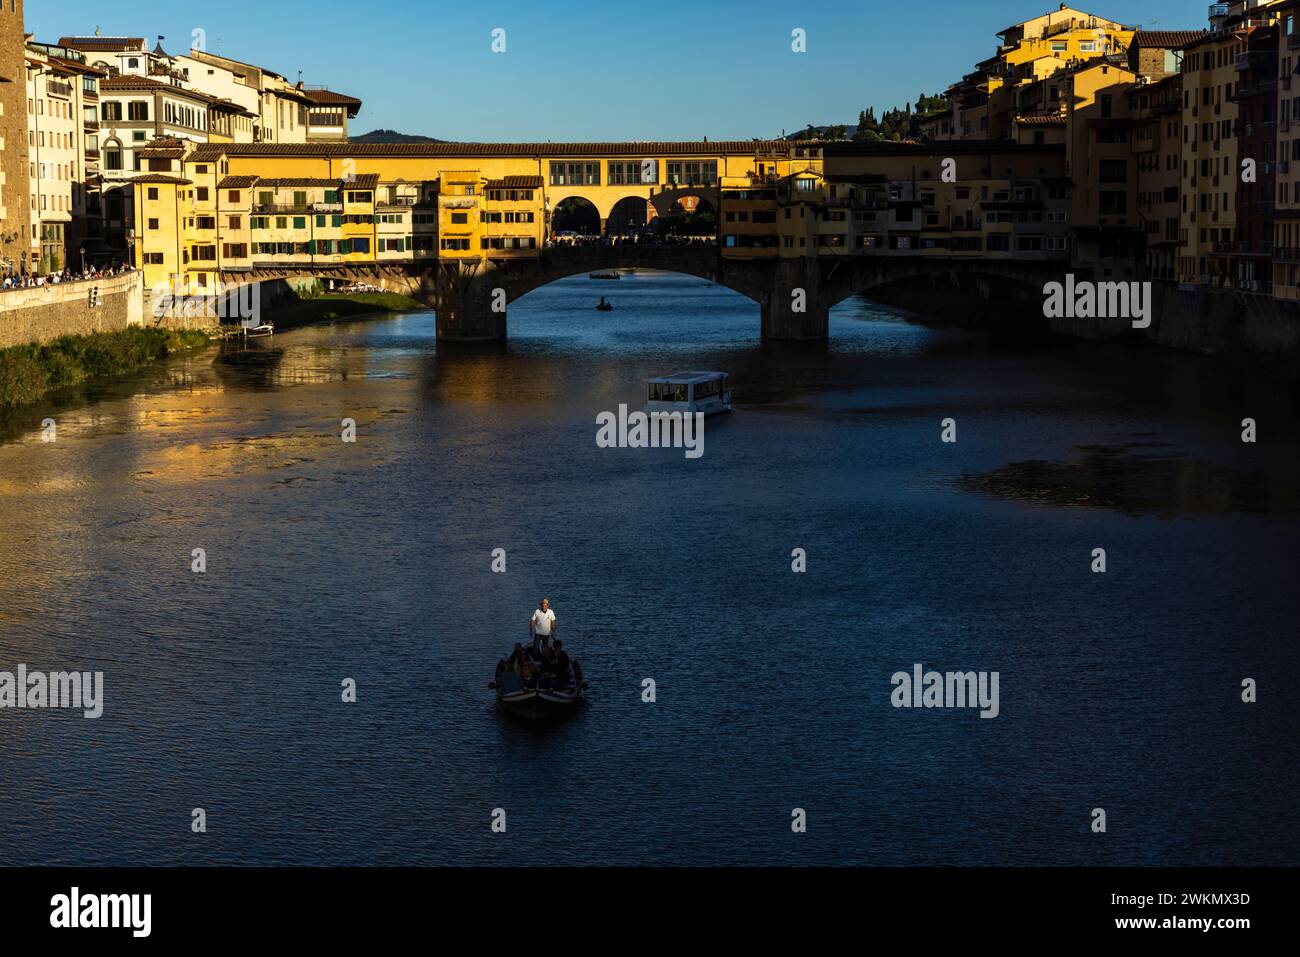 The river Arno flows for 150 miles and is best known for the Ponte Vecchio, a magnificent bridge built in the Middle Ages that’s considered an archite Stock Photo